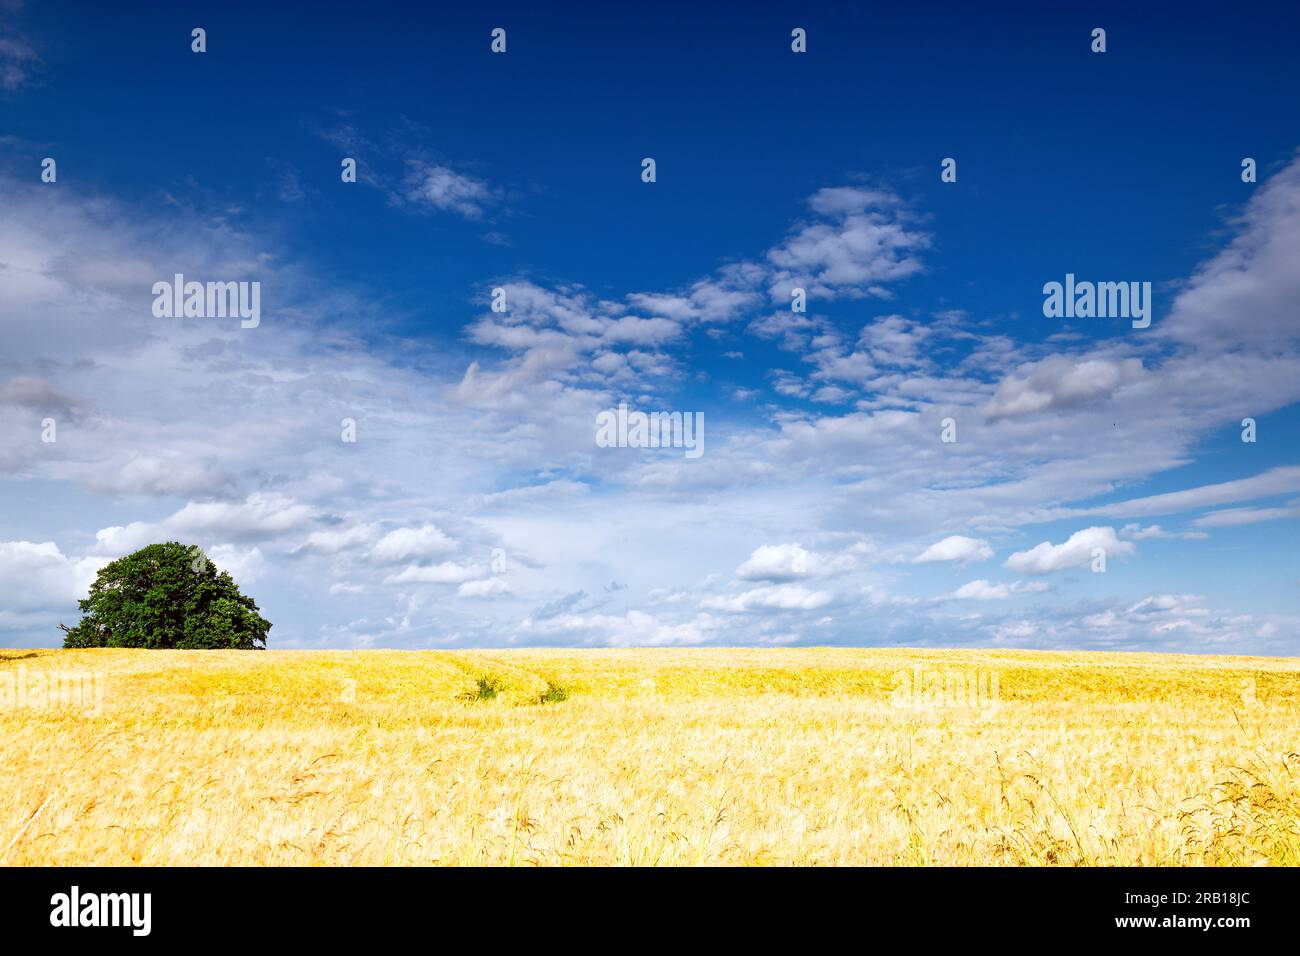 View over ripe corn field reaching to horizon in summer with blue sky and tree on horizon Stock Photo